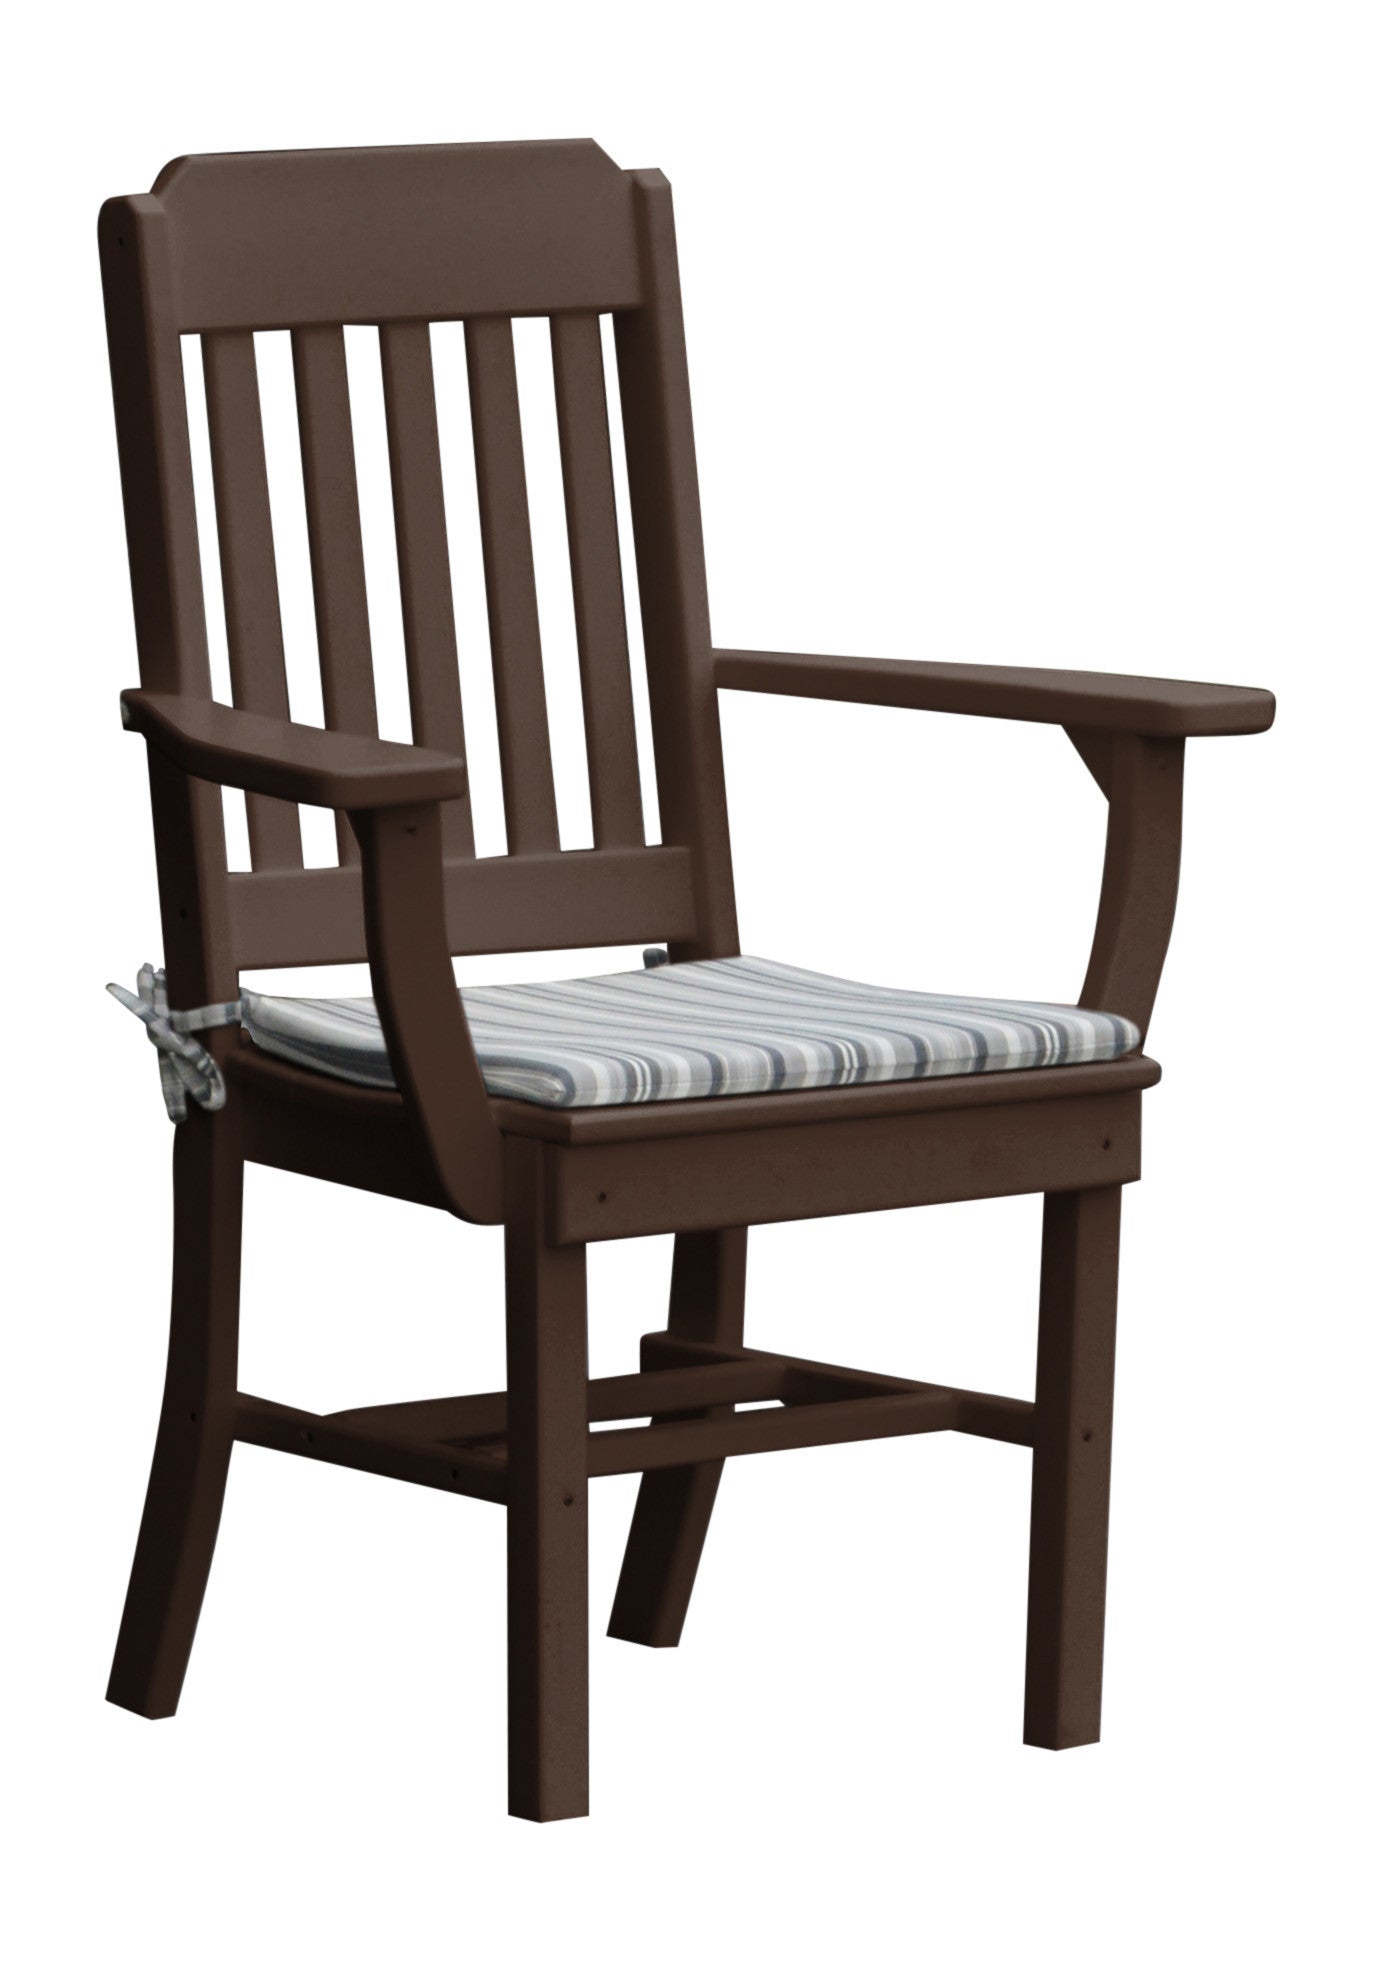 A&L Furniture Company Recycled Plastic Traditional Dining Chair w/ Arms - Tudor Brown